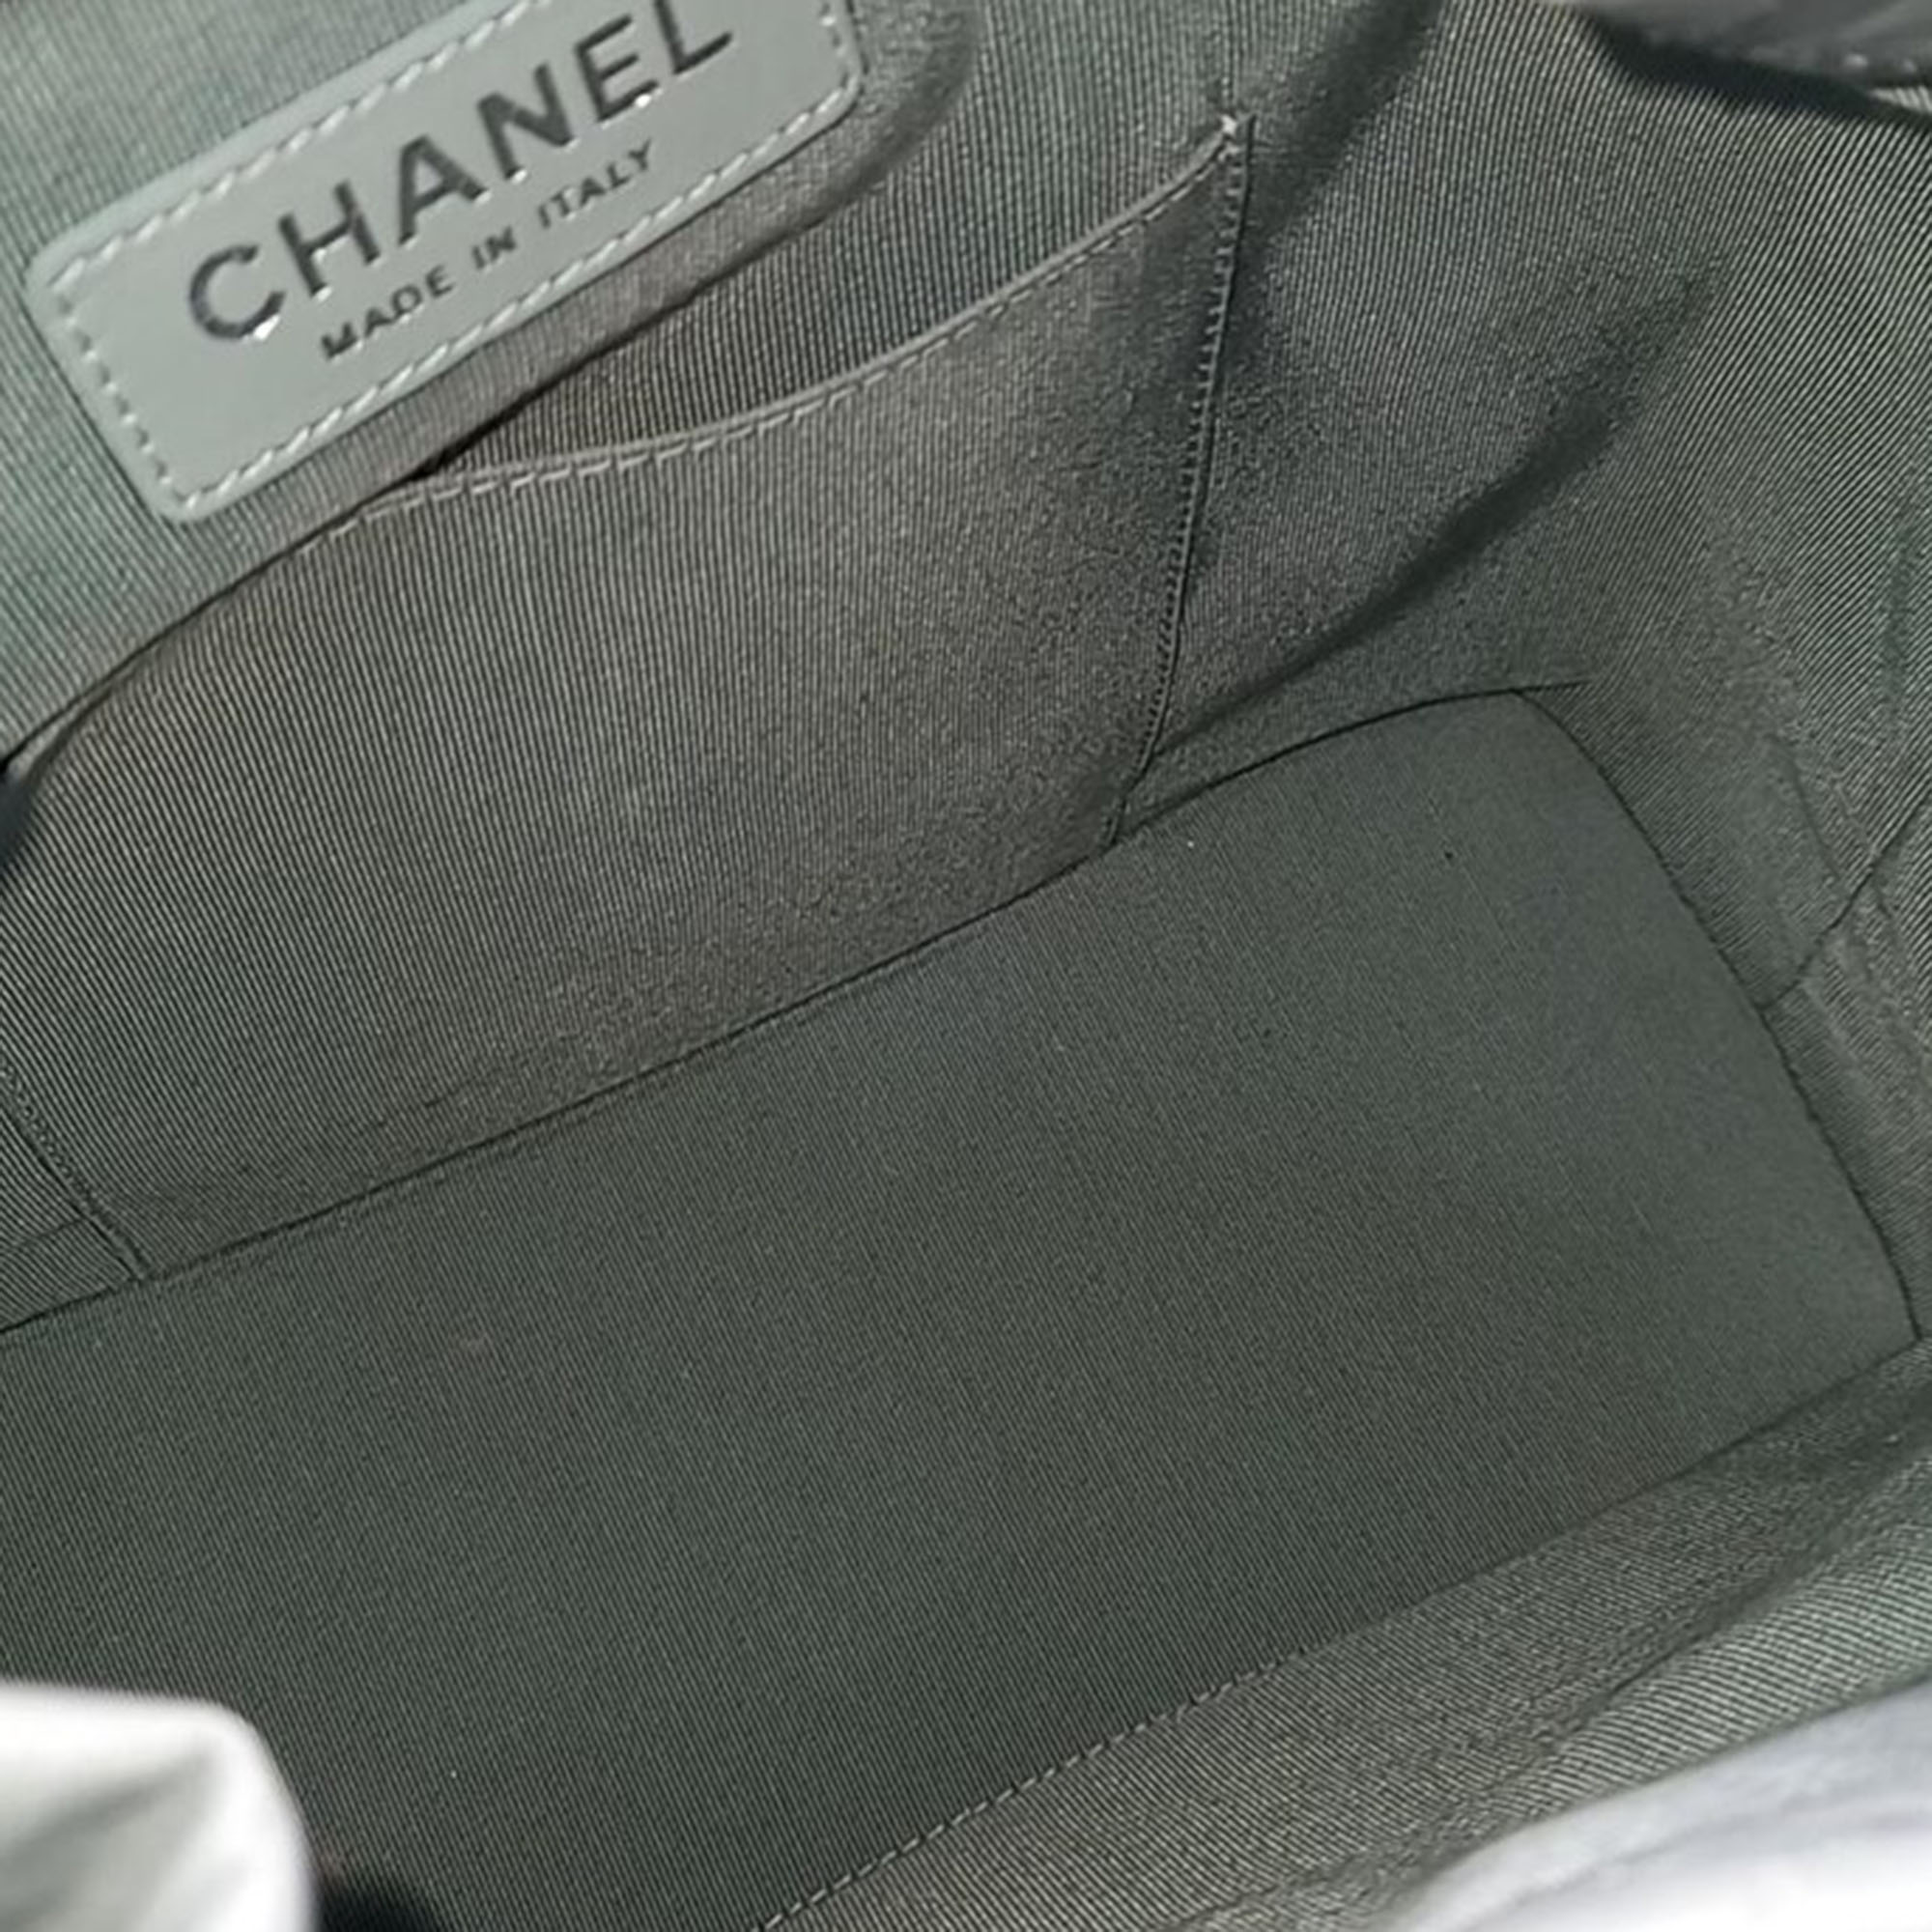 Chanel Gabrielle Backpack Smal